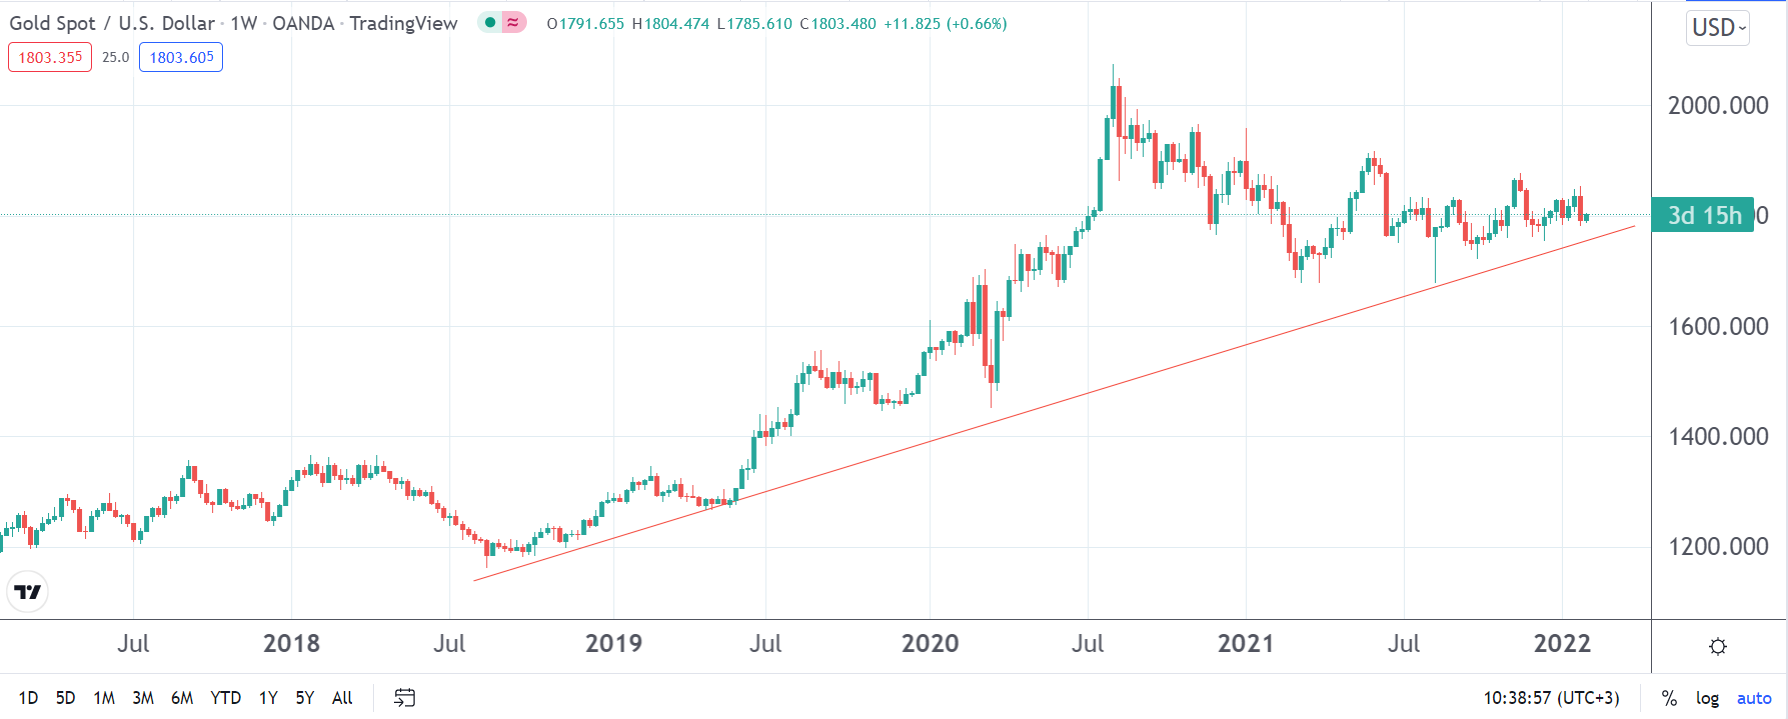 Gold Price Forecast for 2022, 2025, 2030, and Beyond